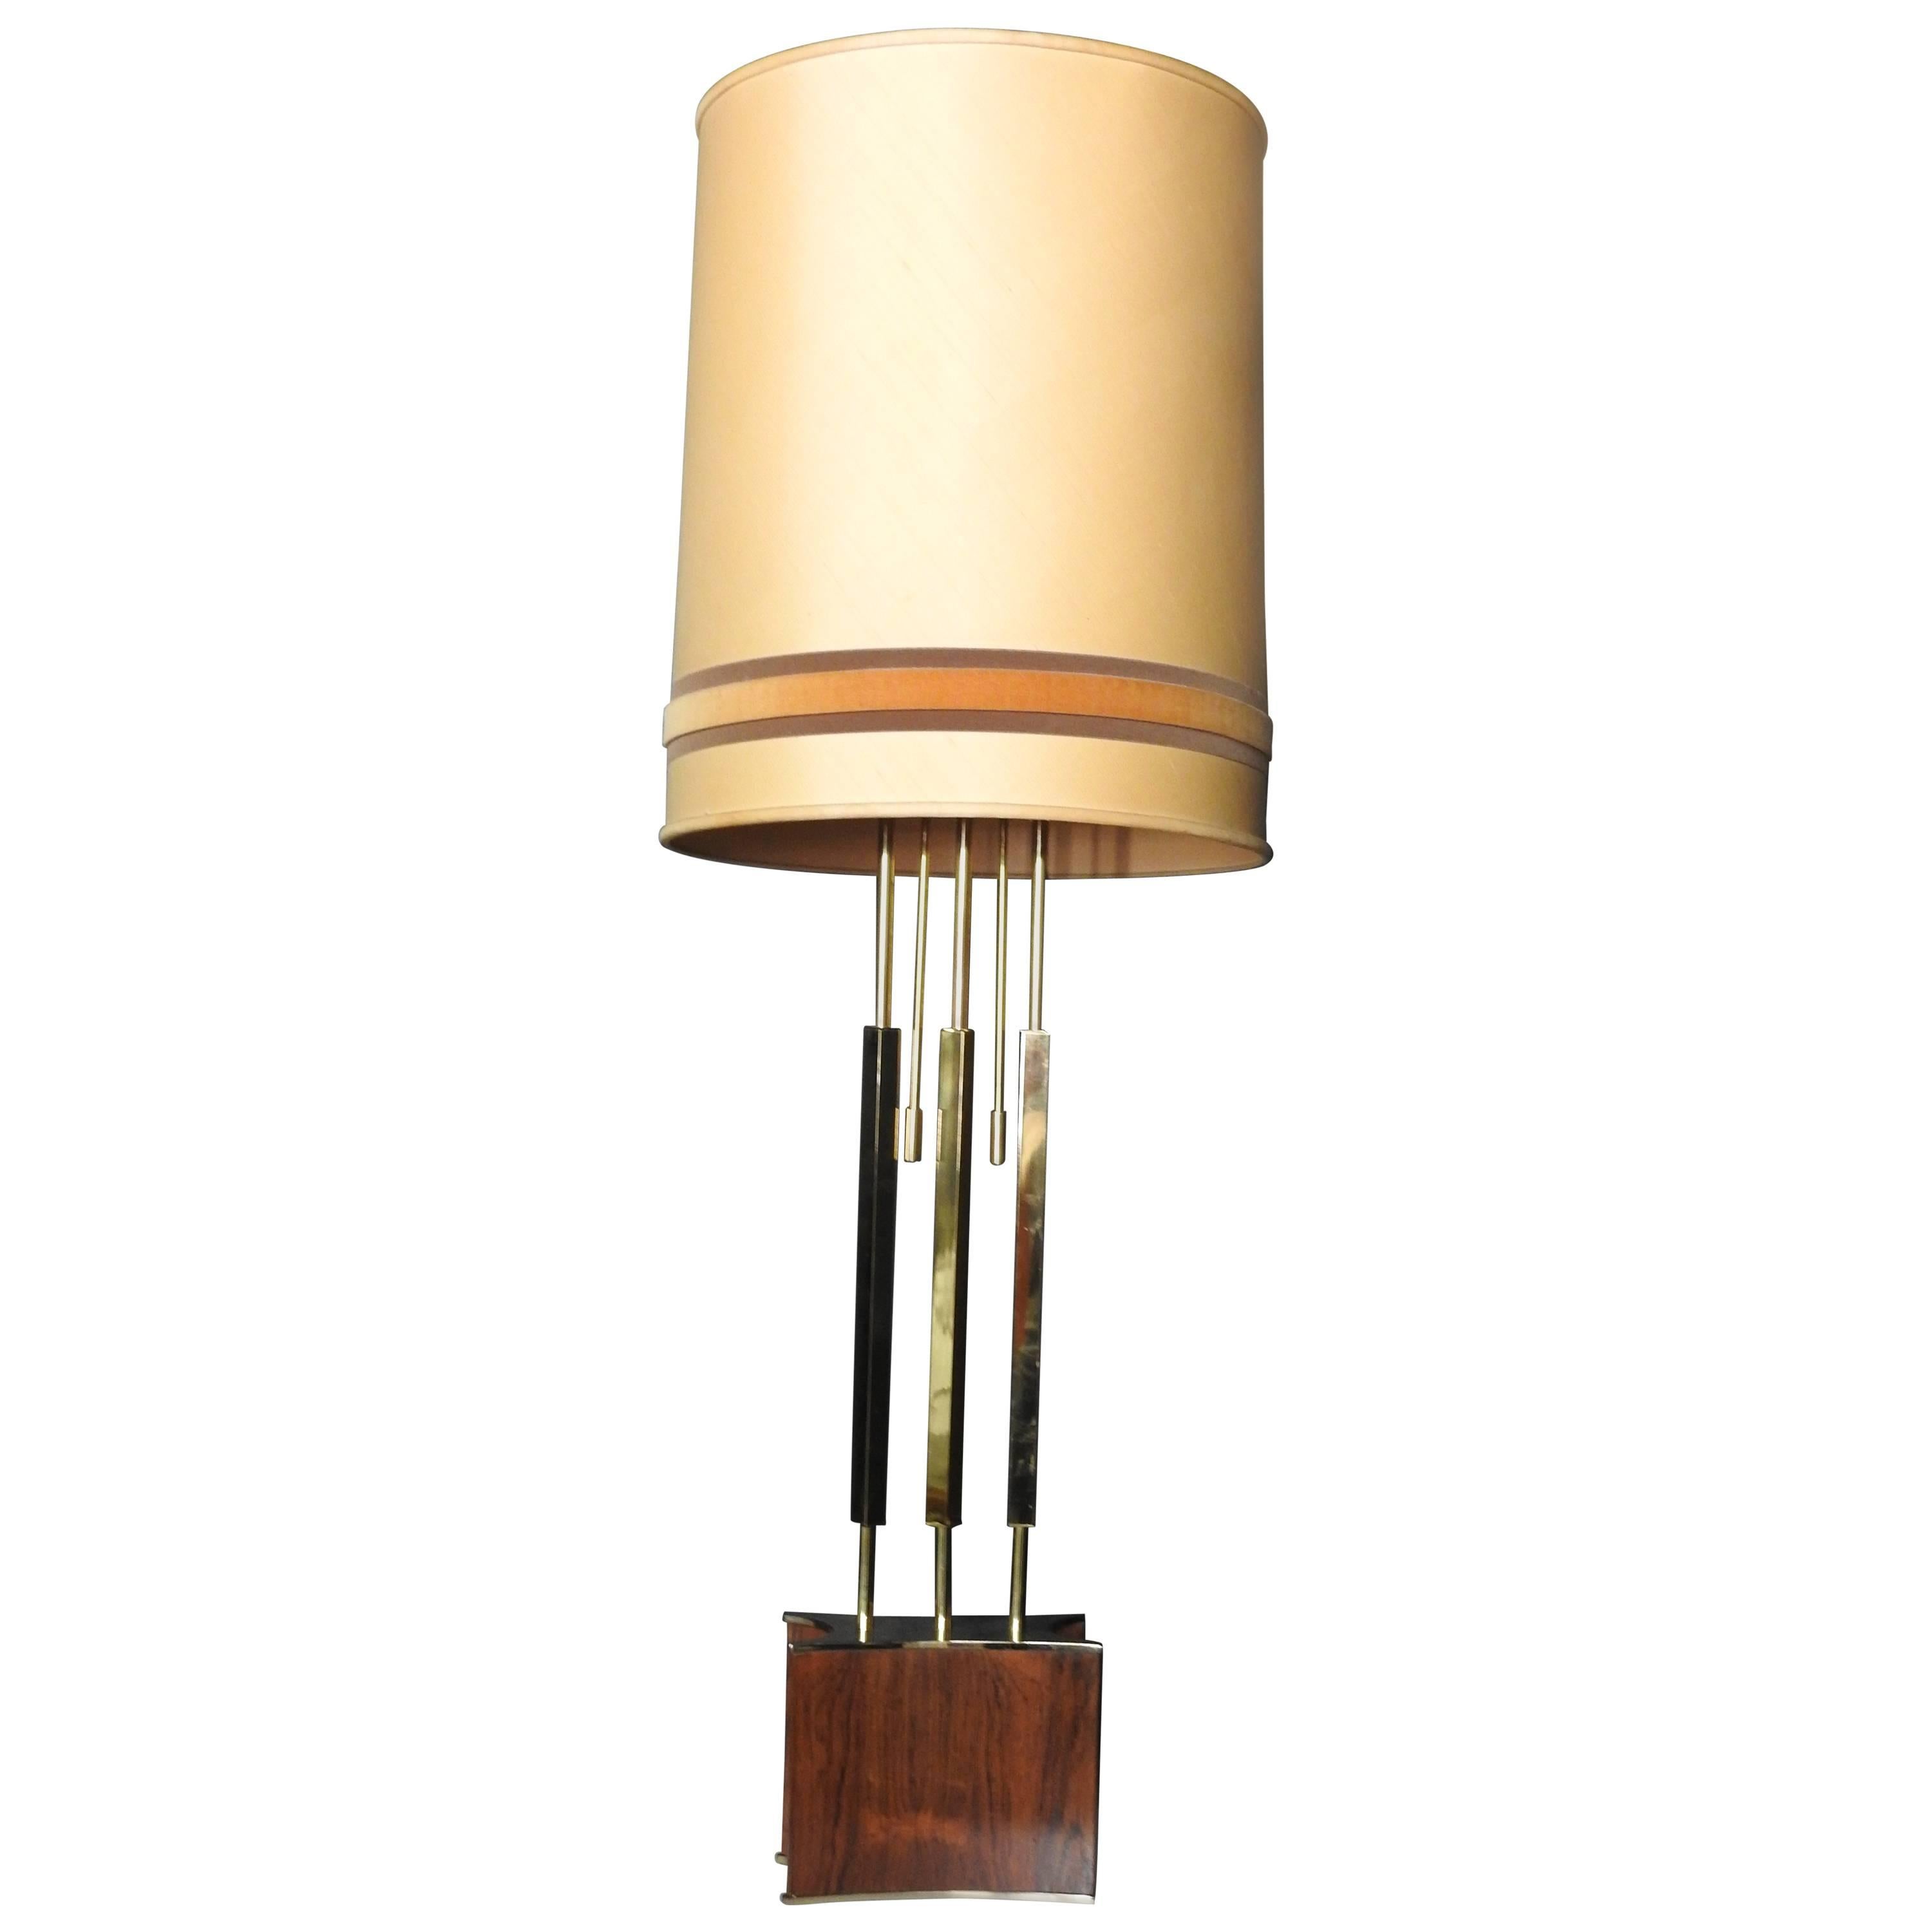 Mid-Century Modern Floor Lamp Attributed to Laurel Lamp For Sale